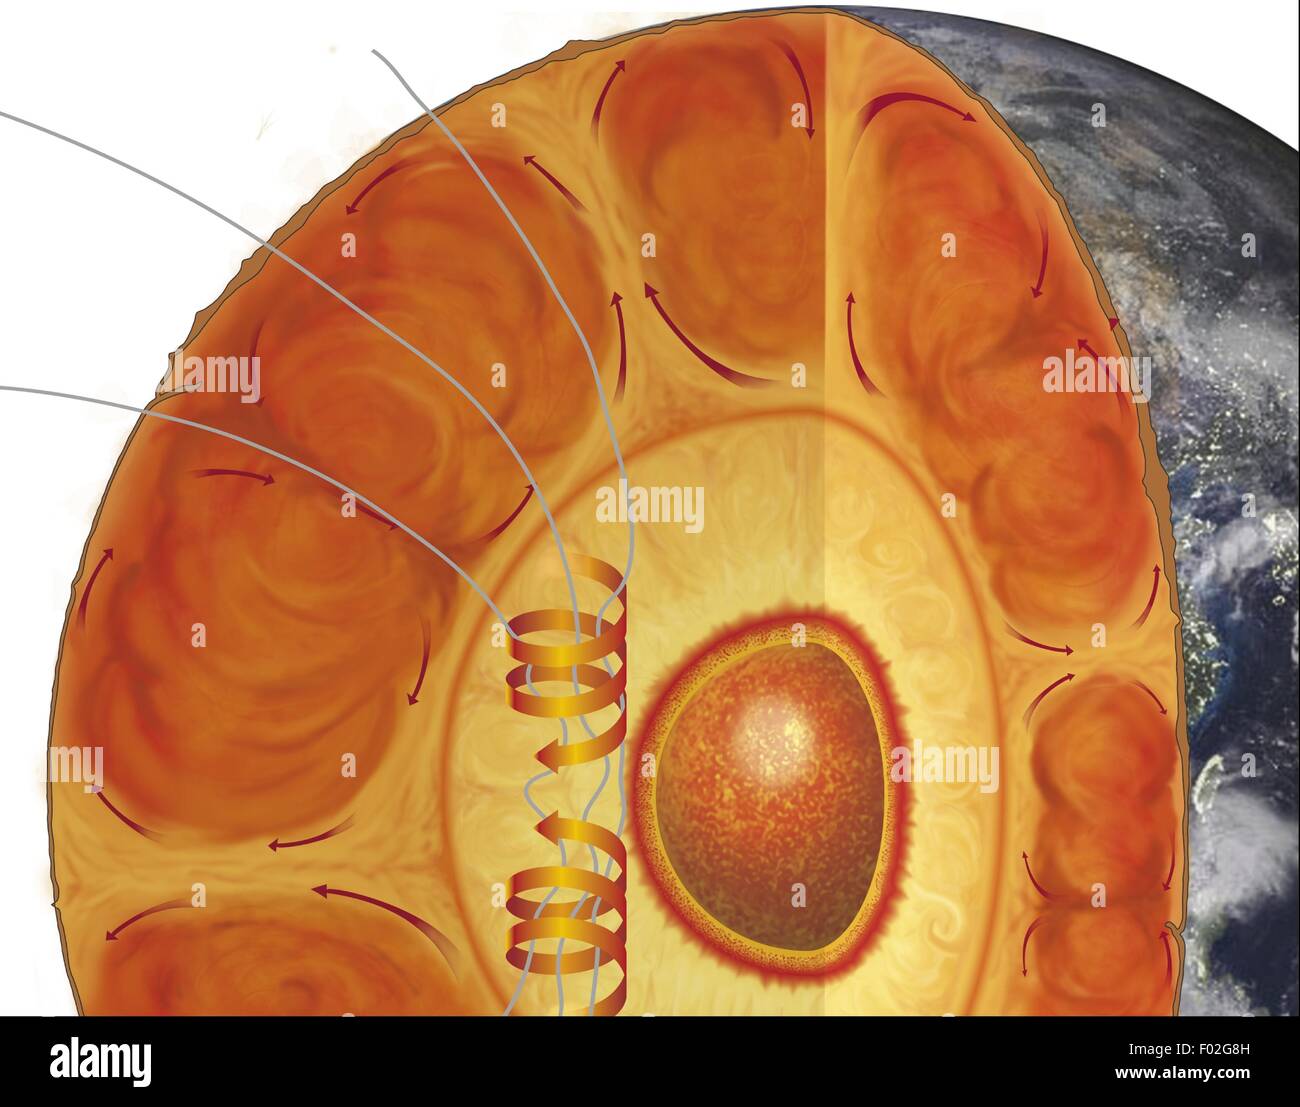 Geology. Earth interior structure. Inner core, outer core (where convective motion occurs), mantle and crust. Stock Photo